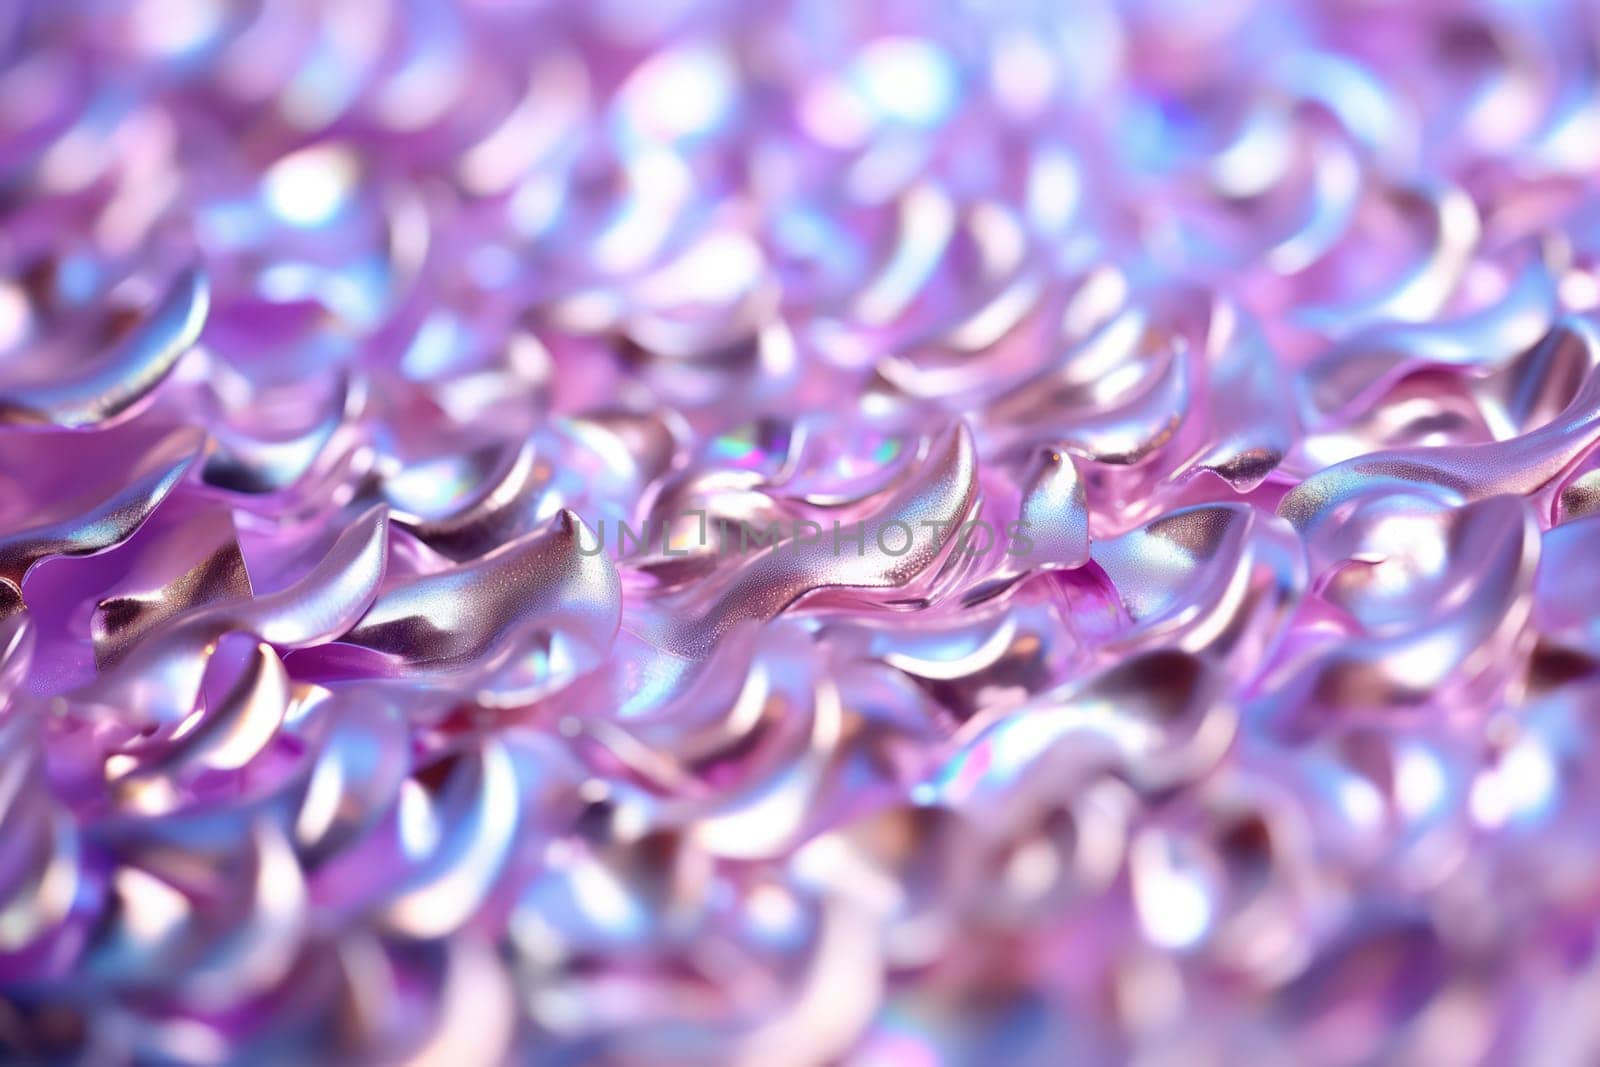 Close up of wavy, iridescent texture with purple and silver hues abstract background